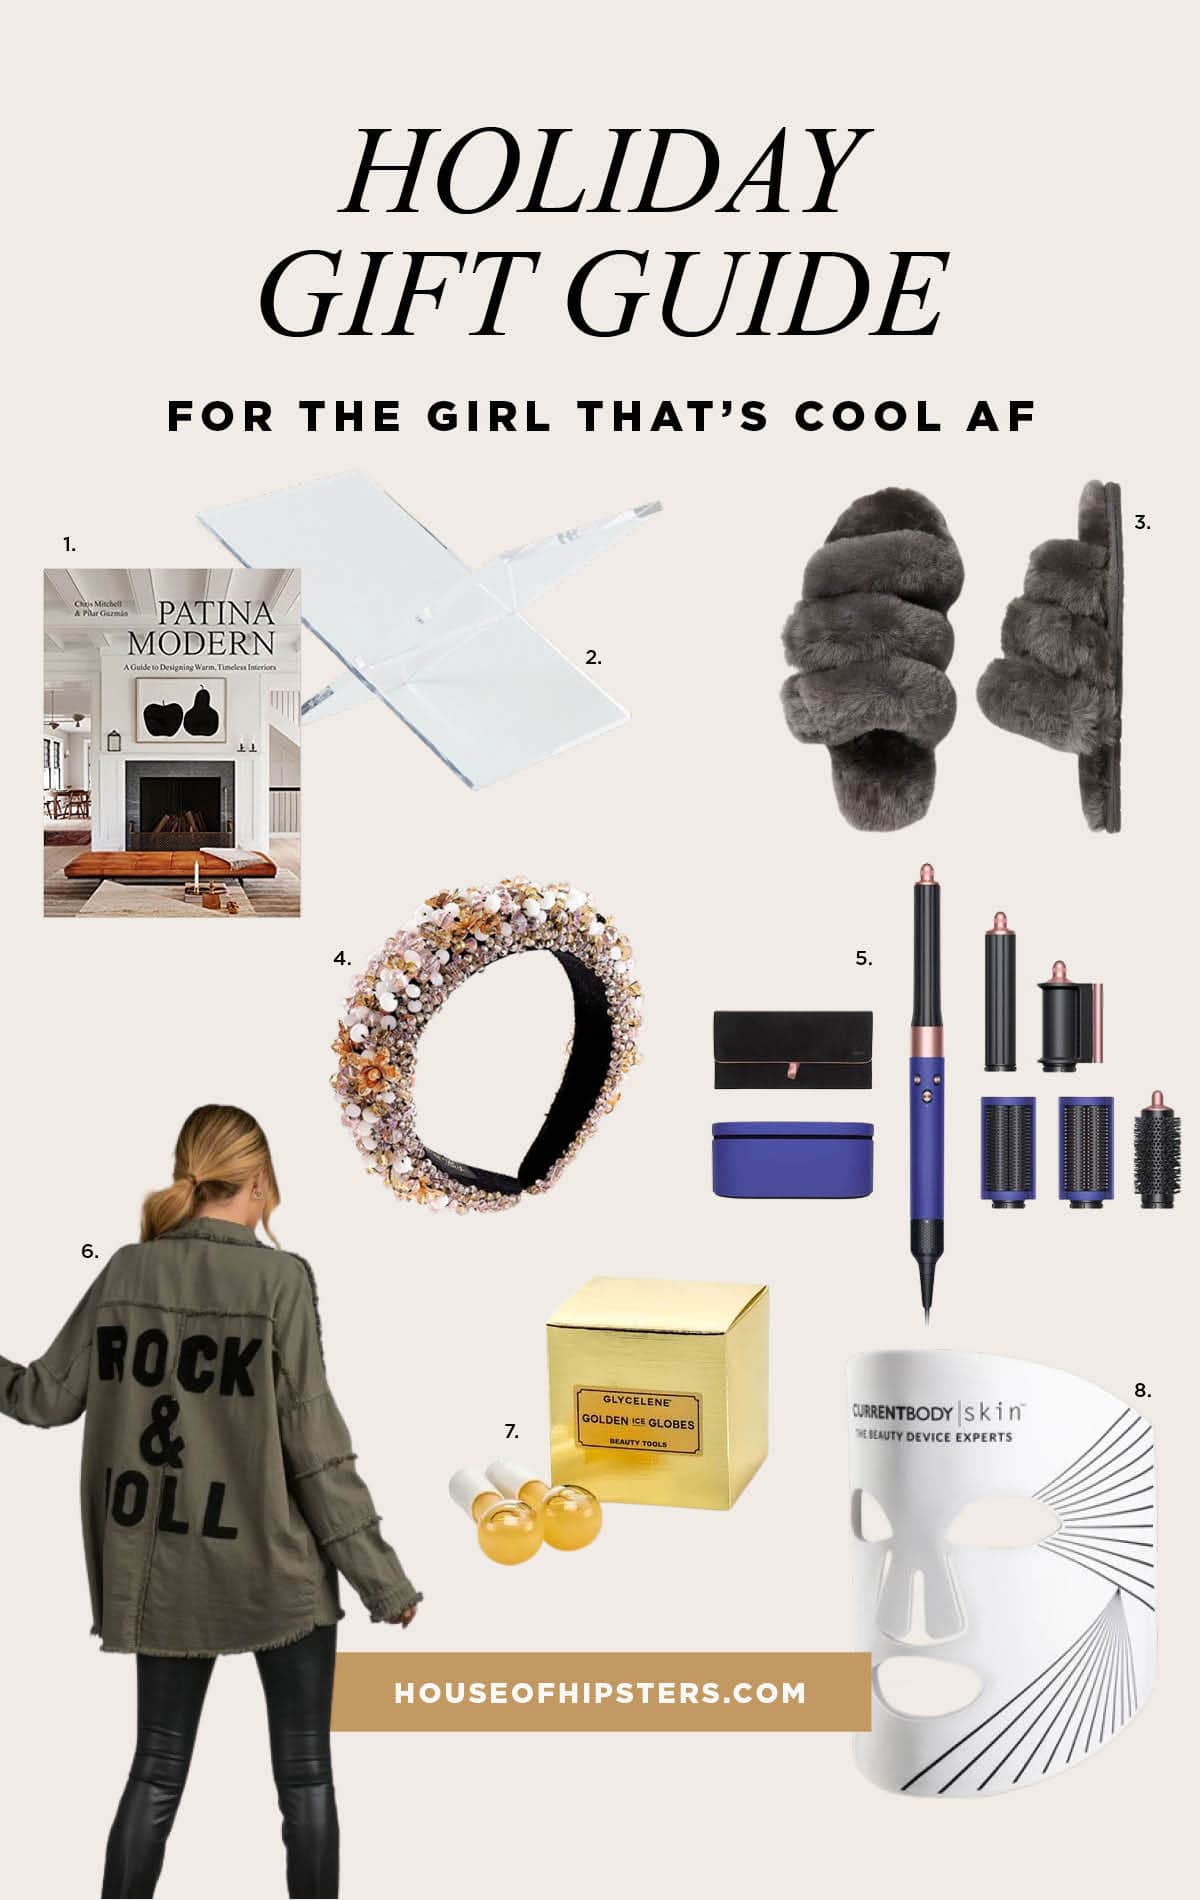 Unique gifts for her - holiday gift guide ideas for the cool girl